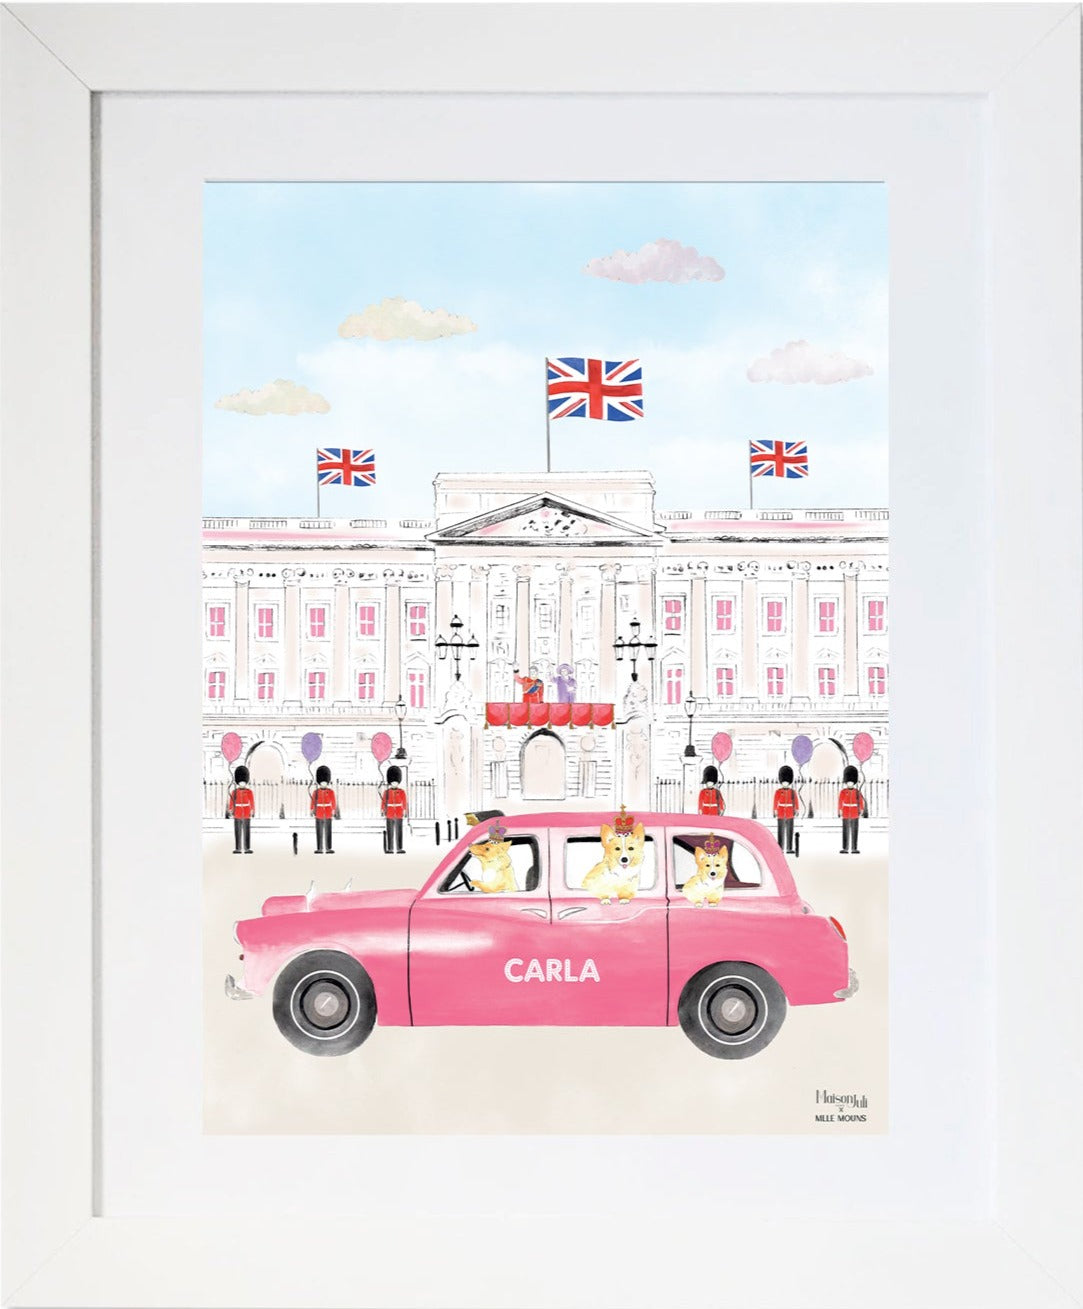 The Pink Black Cab of London